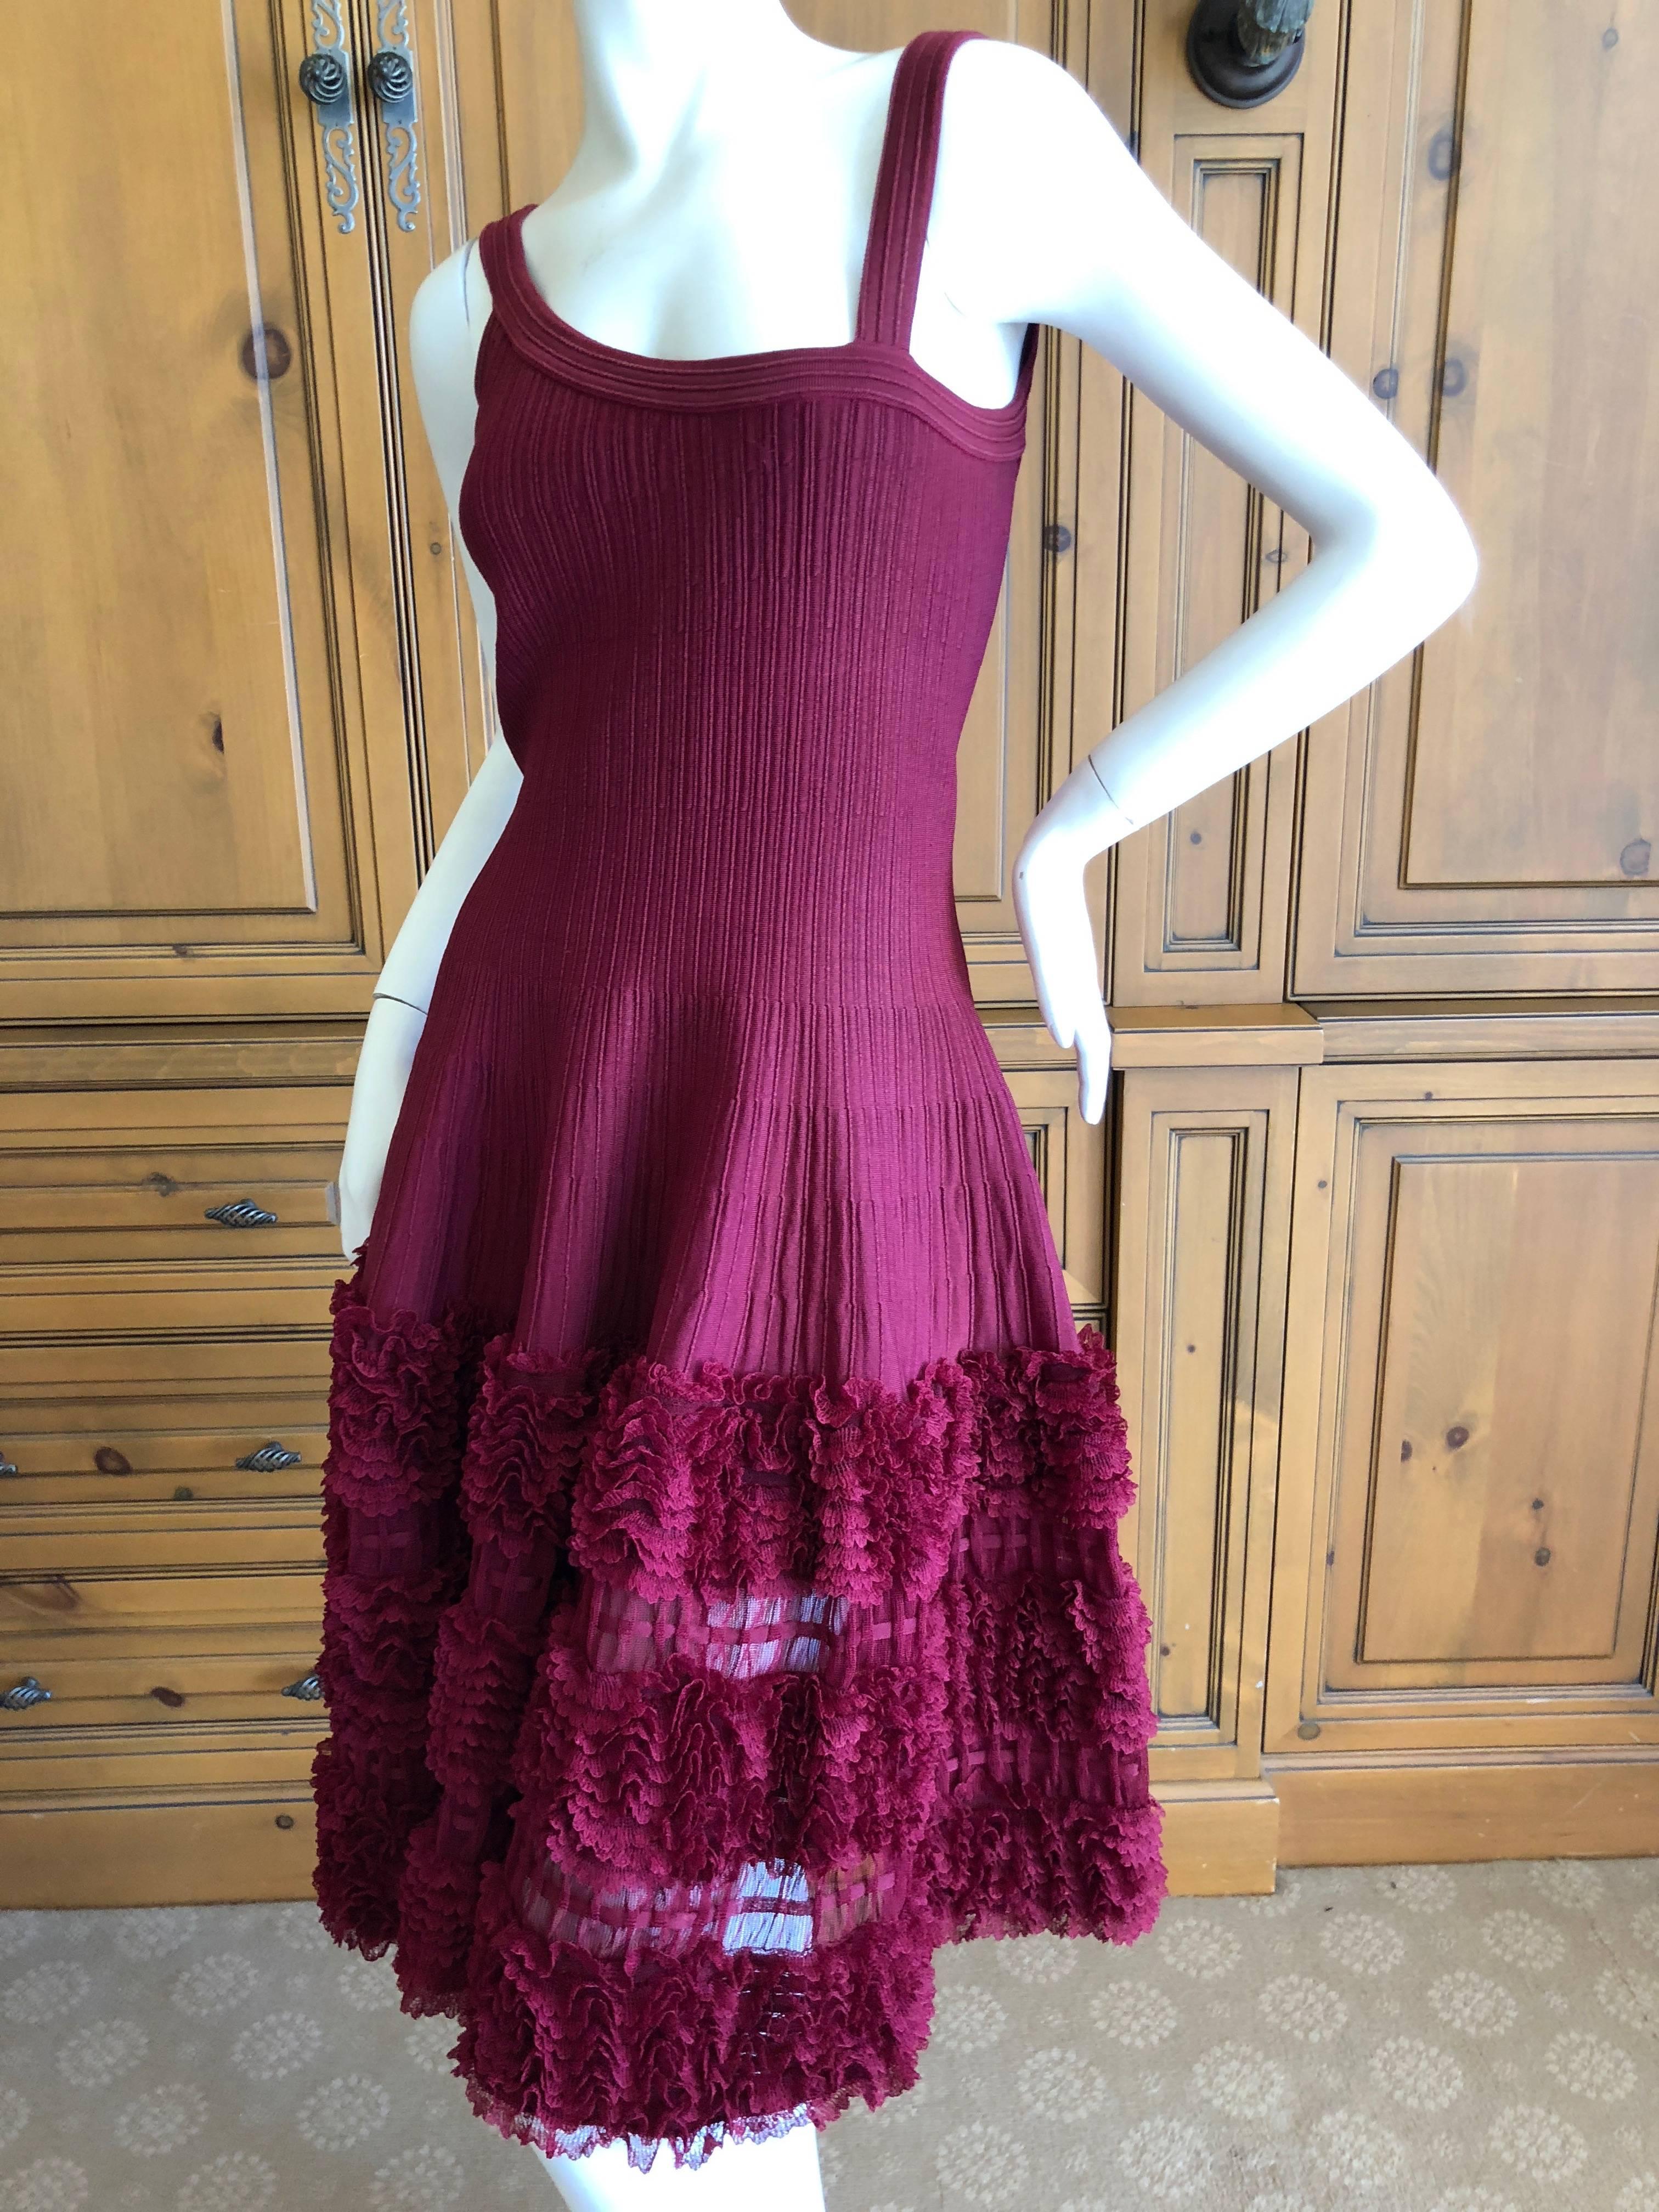 Azzedine Alaia Wonderful Vintage Knit Dress with Full Ruffle Skirt.

  There is  a lot of stretch

No size tag, it is Alaia M-L

Bust 36"

 Waist 30"

 Hips 38" 

Length 48"

Excellent condition

 